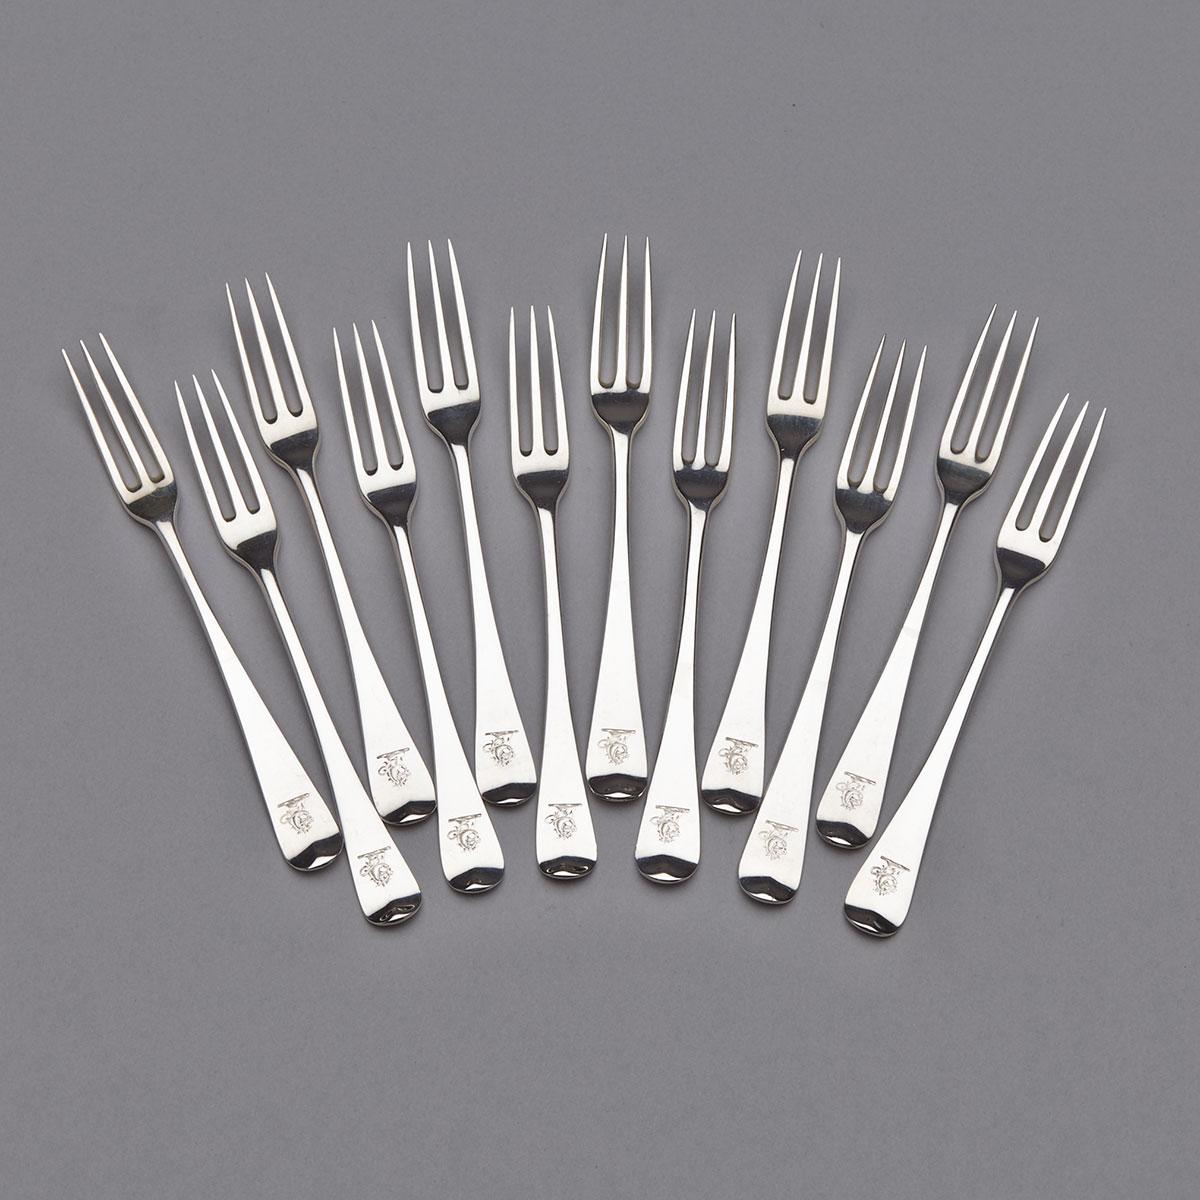 Twelve George III Silver Old English Pattern Three-Pronged Dessert Forks, Solomon Hougham (7) and William Eley & William Fearn (5), London, 1800 and 1802 respectively